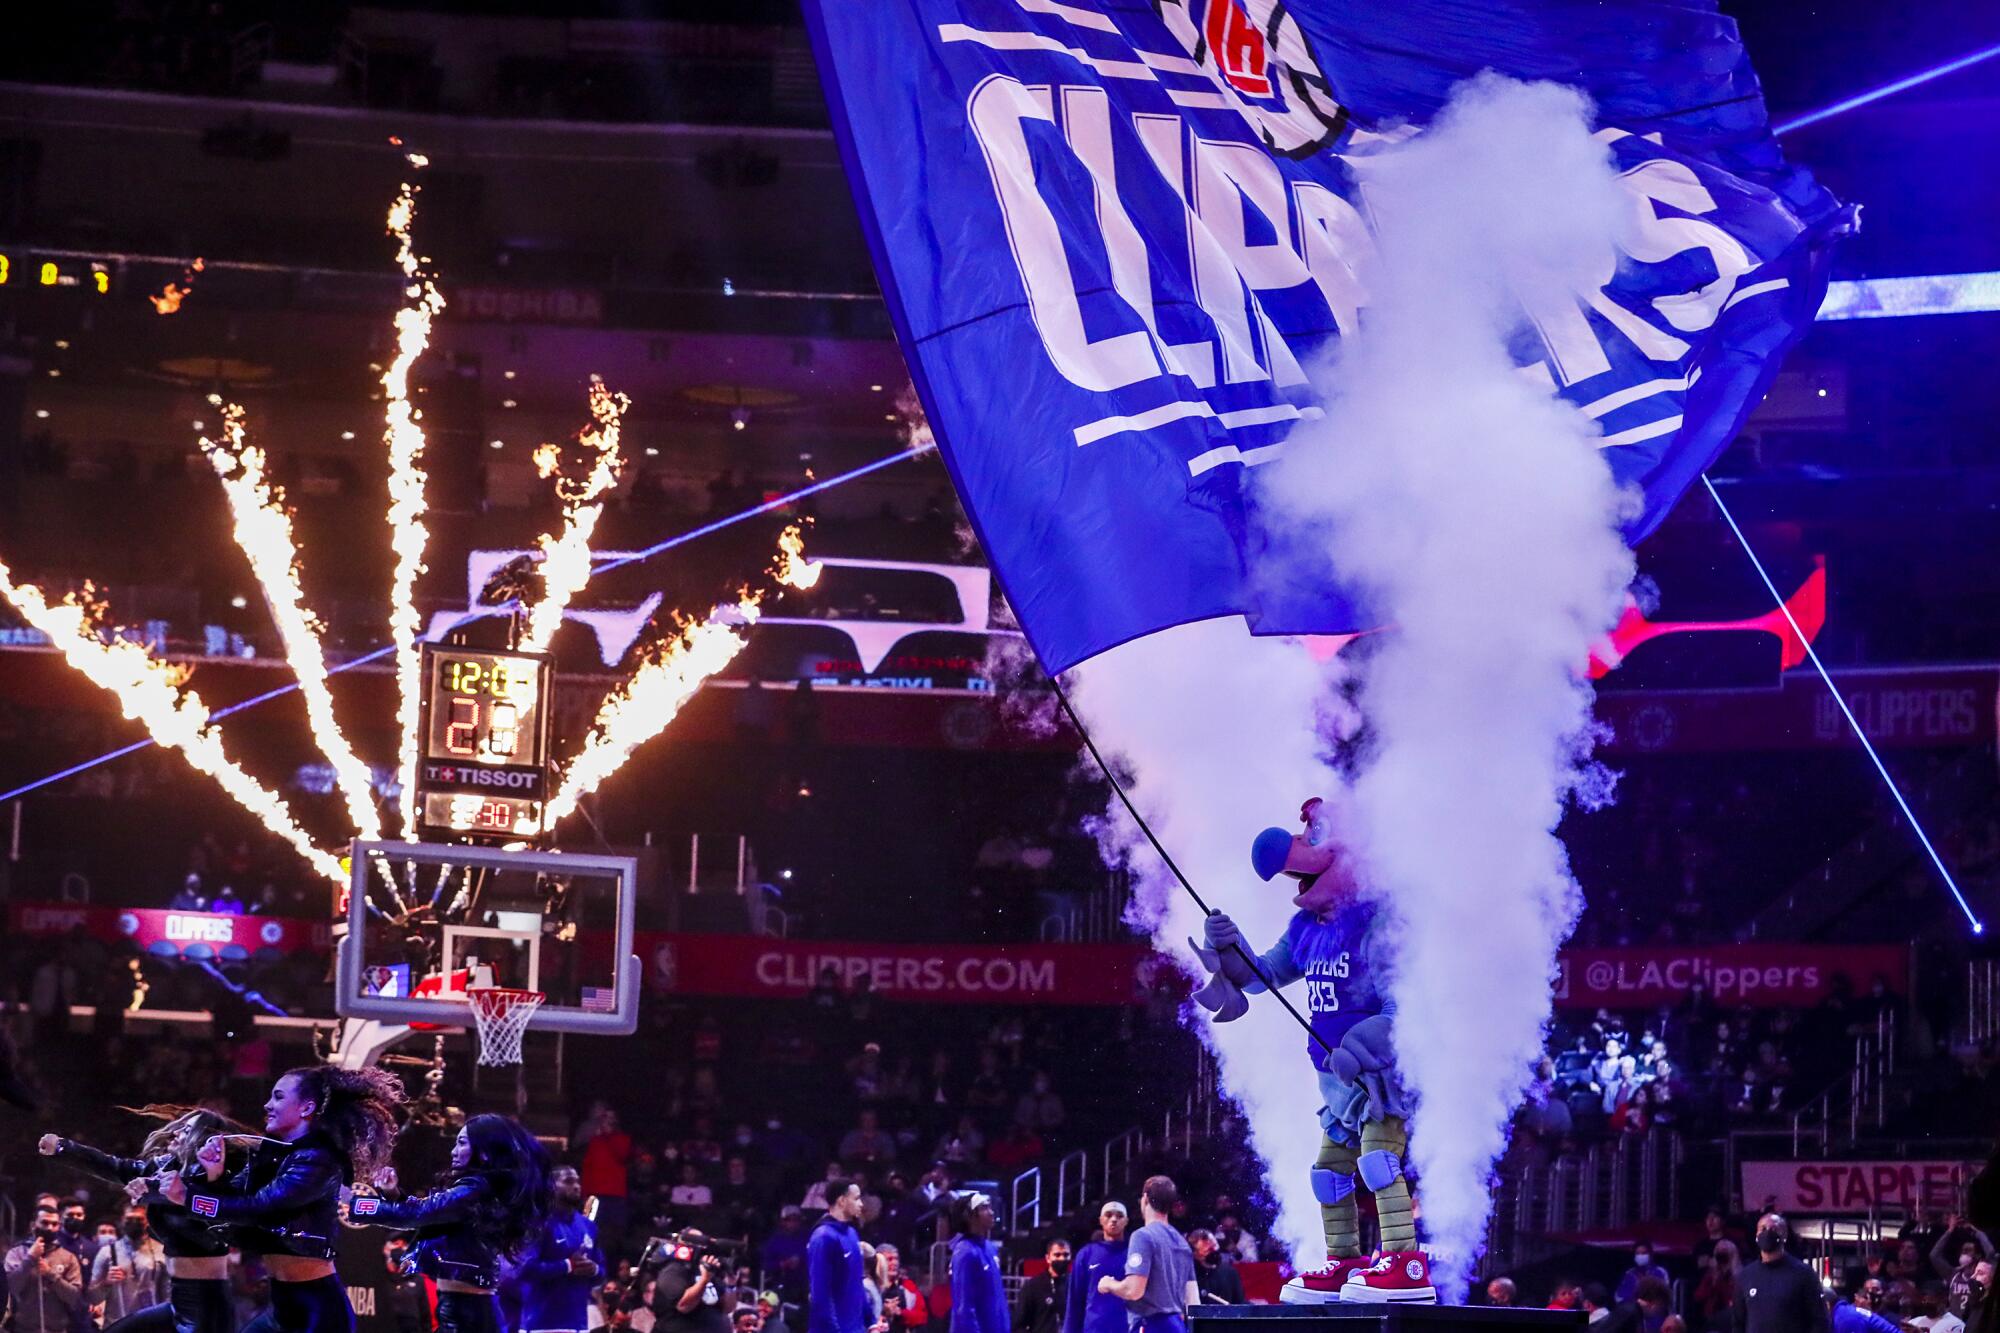 Chuck the Condor waves a banner midcourt during pregame festivities for a Clippers-Trail Blazers game in 2021.